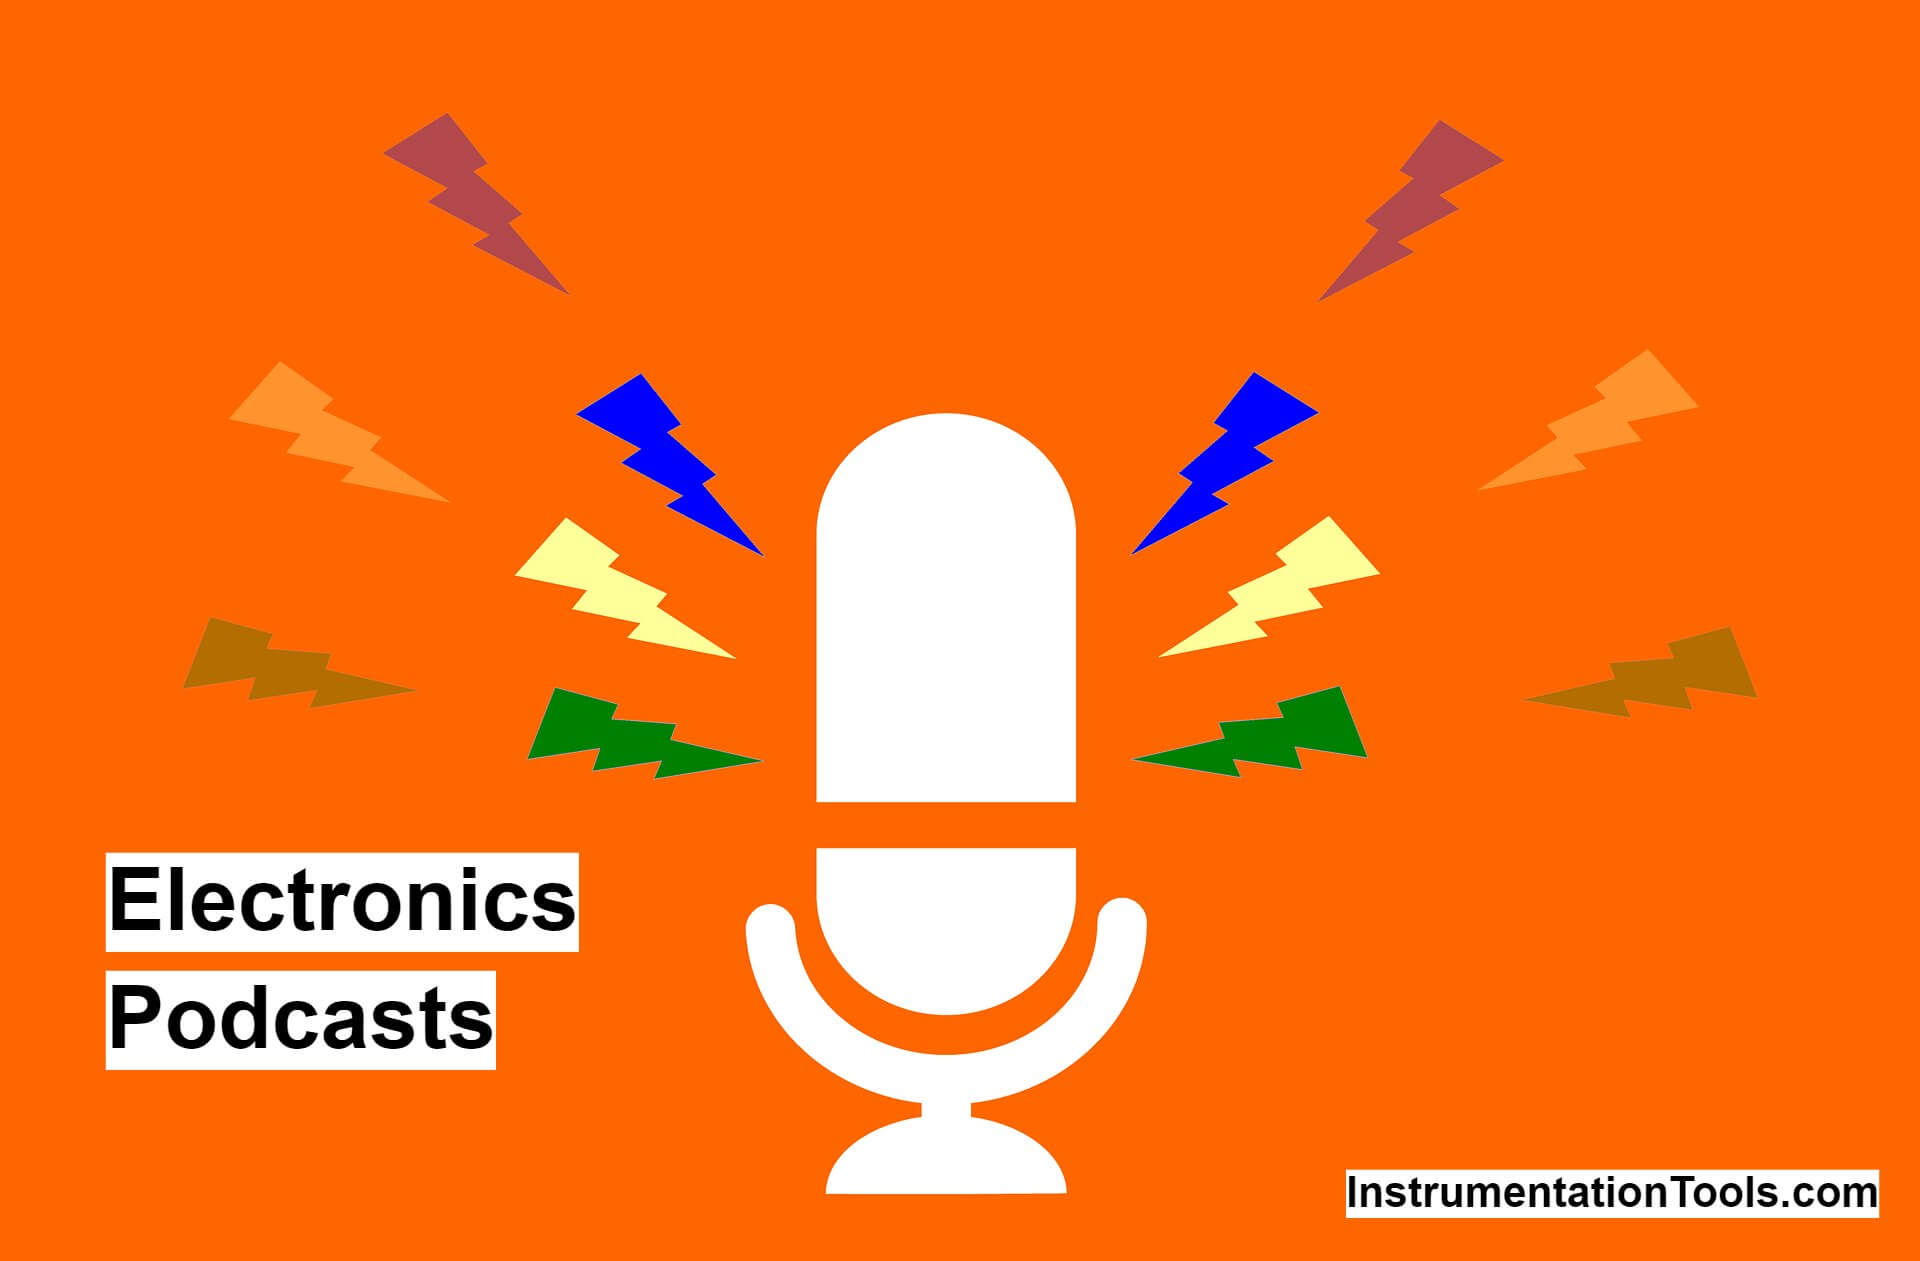 Top 10 Podcasts about Electronics